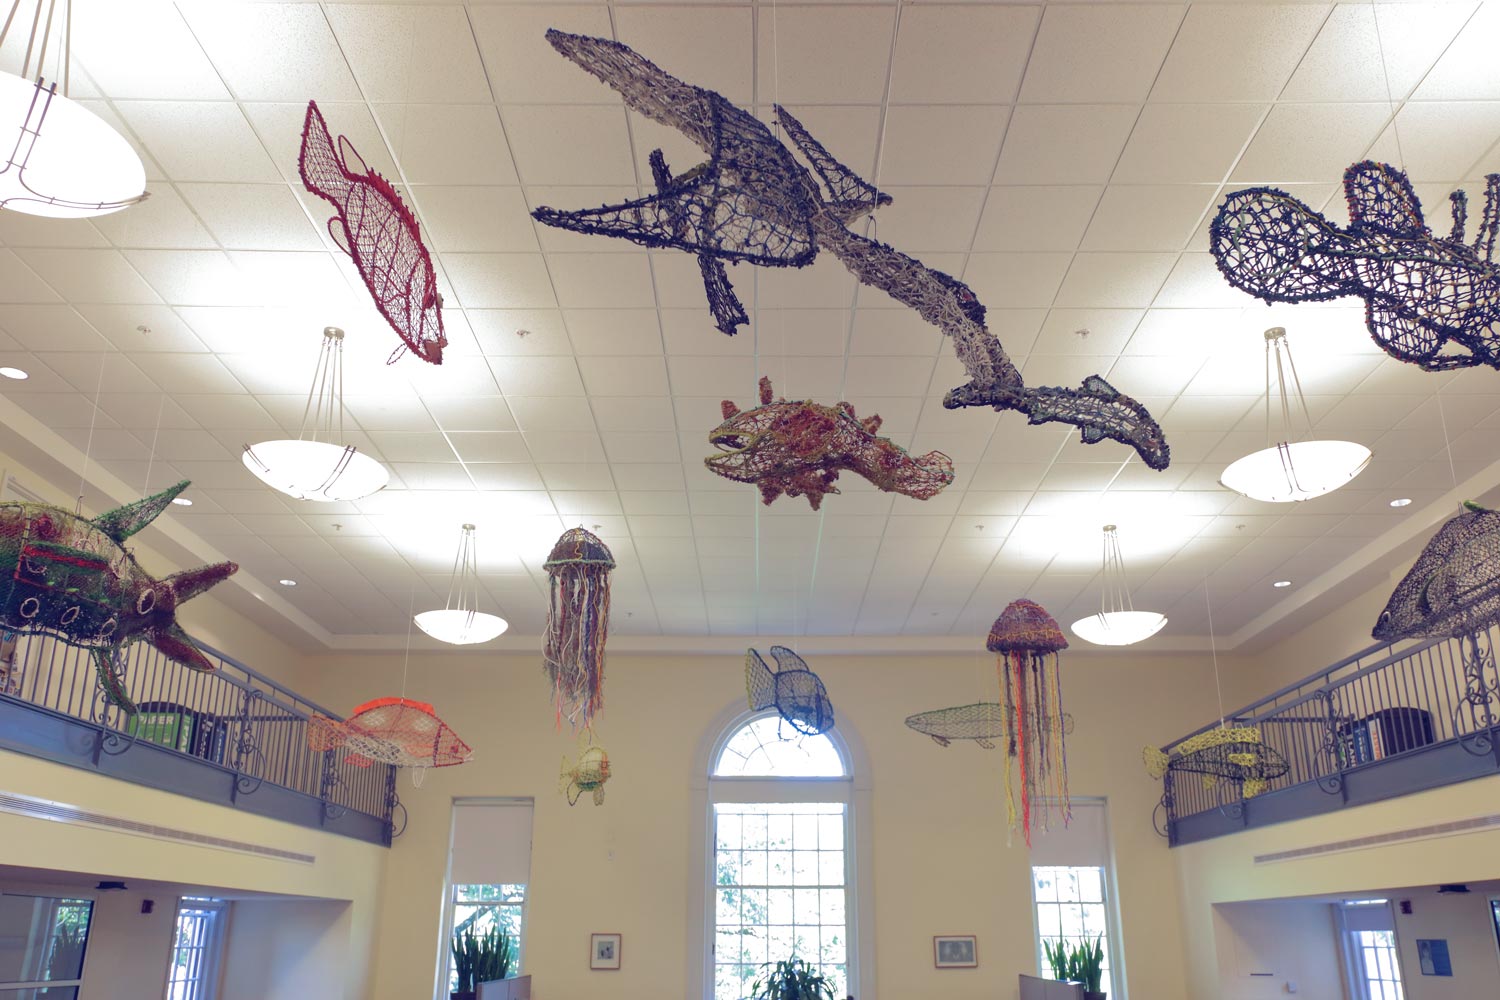 Sculptures made from “ghost nets” hang from the ceiling 